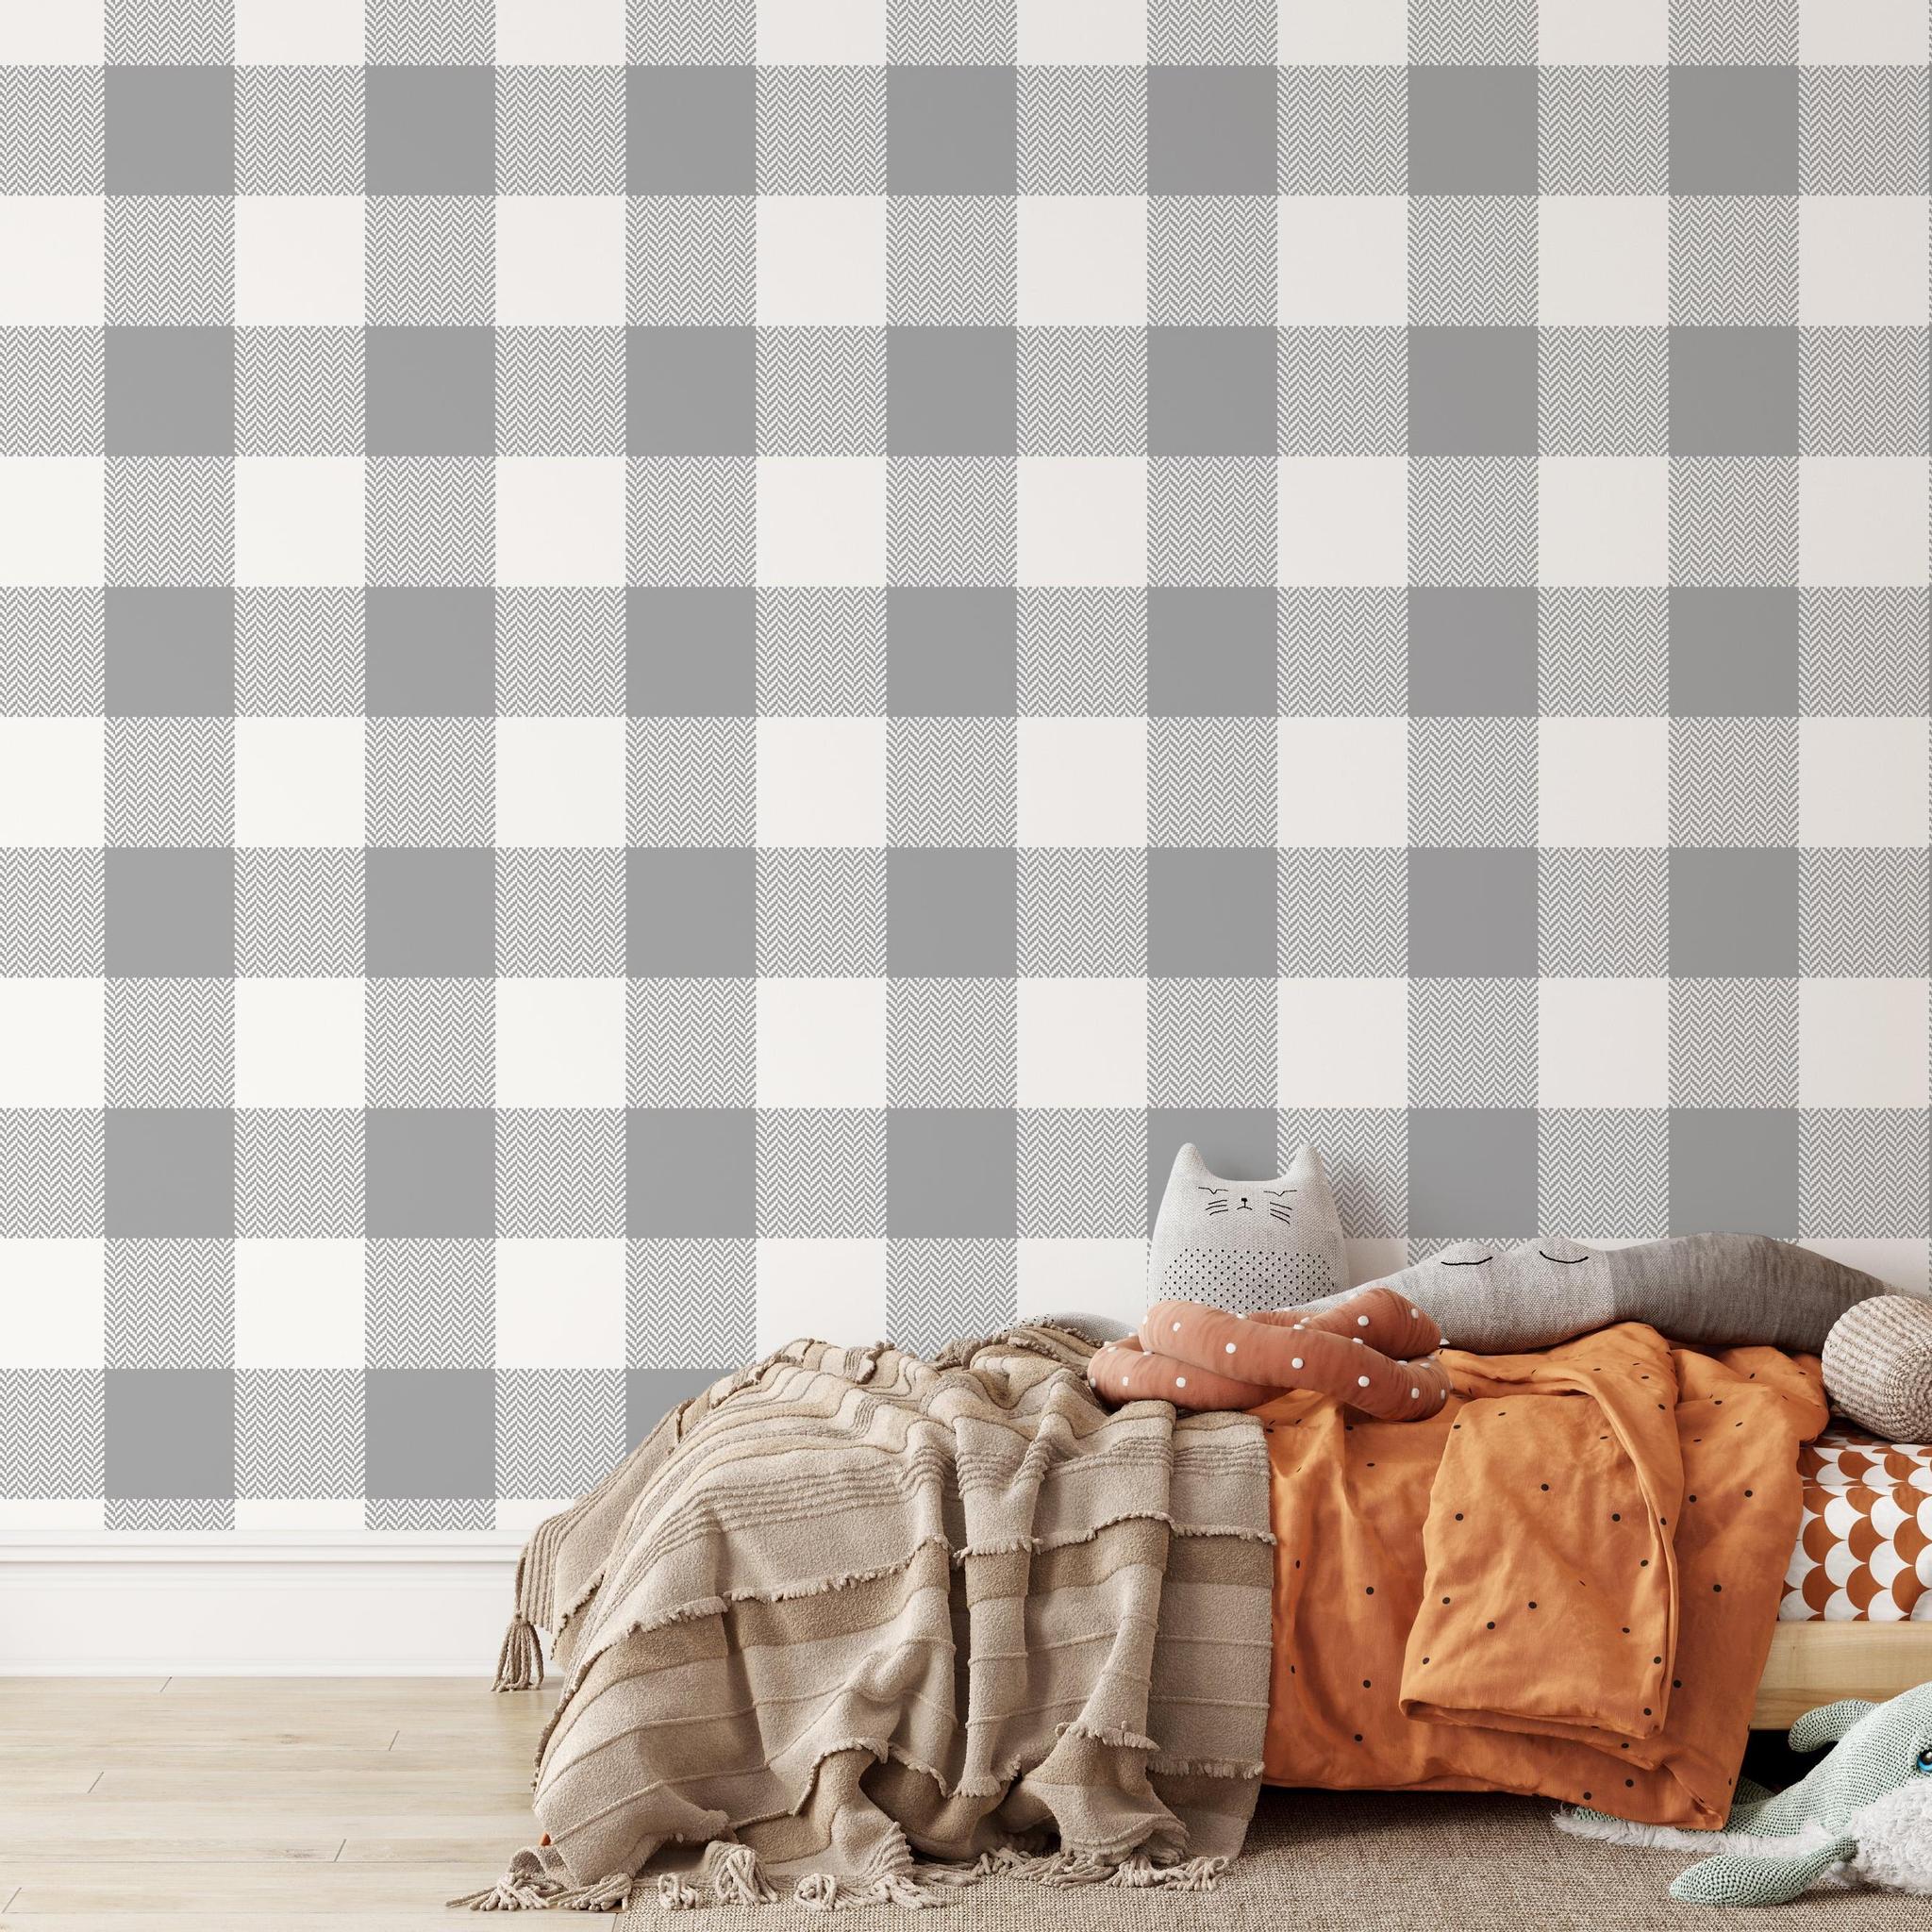 Wall Blush's Oswald - Buffalo Check Wallpaper in a stylish kids' bedroom, showcasing the modern pattern and cozy decor.
